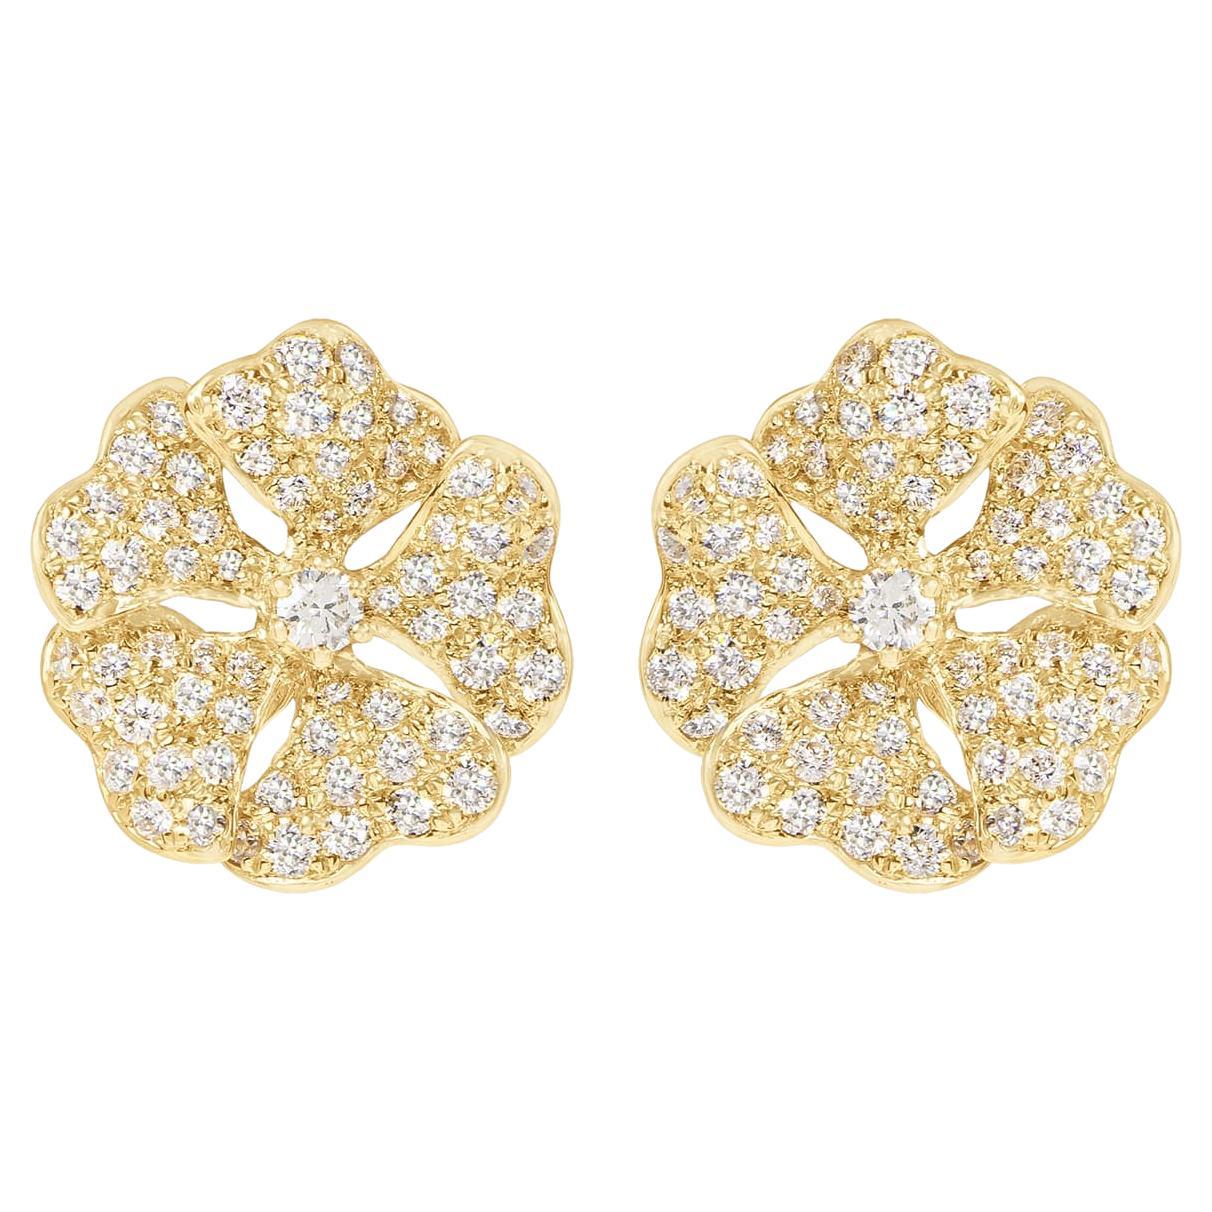 Bloom Gold and Pavé Diamond Small Stud Earrings in 18k Yellow Gold